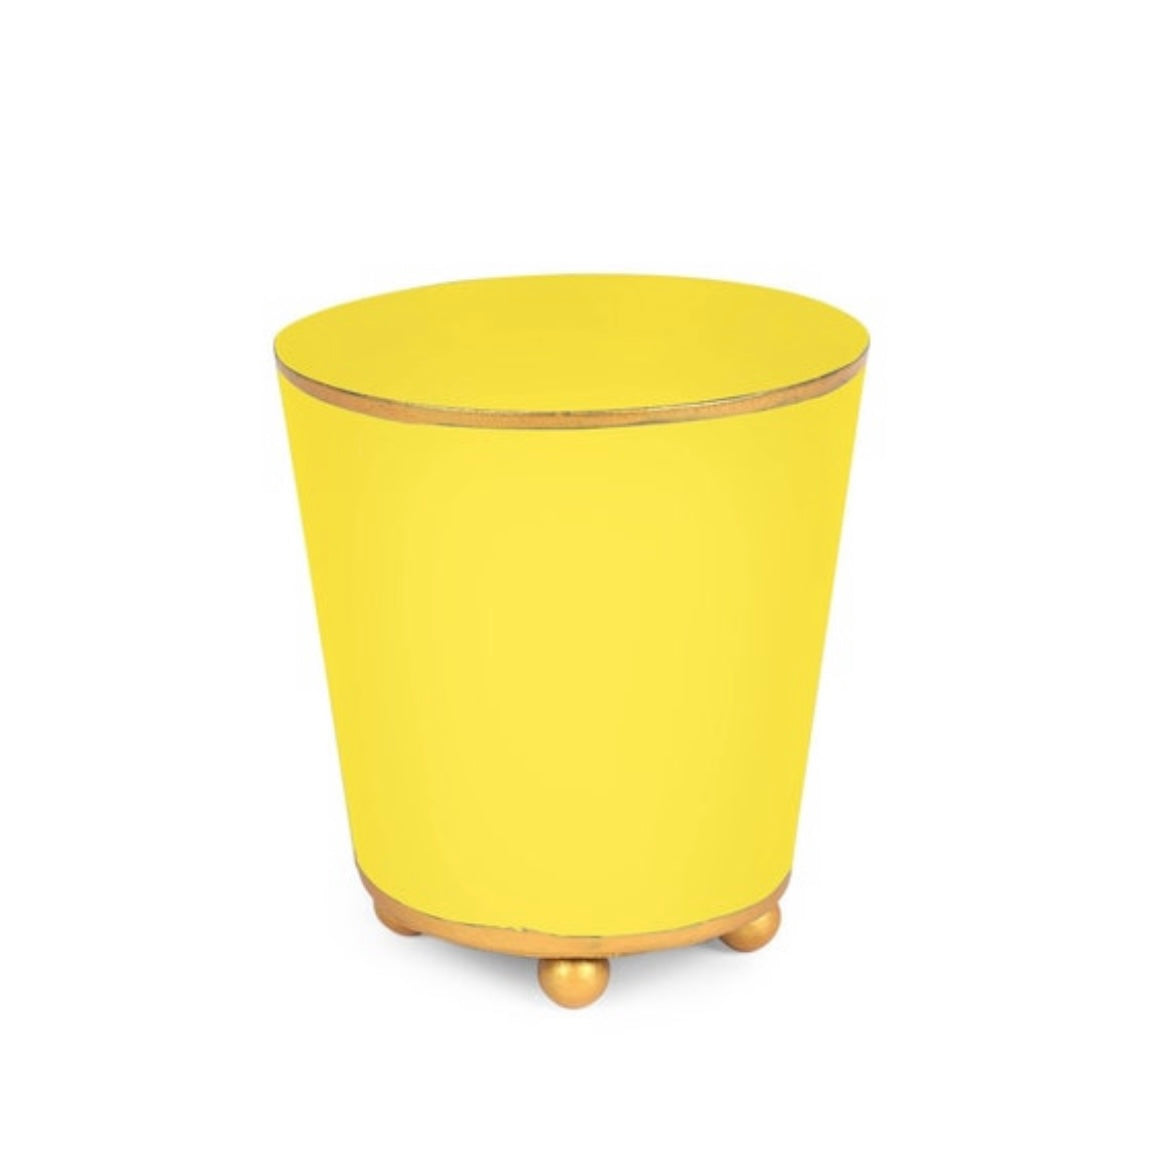 Yellow Cache Planter - Two Sizes Available